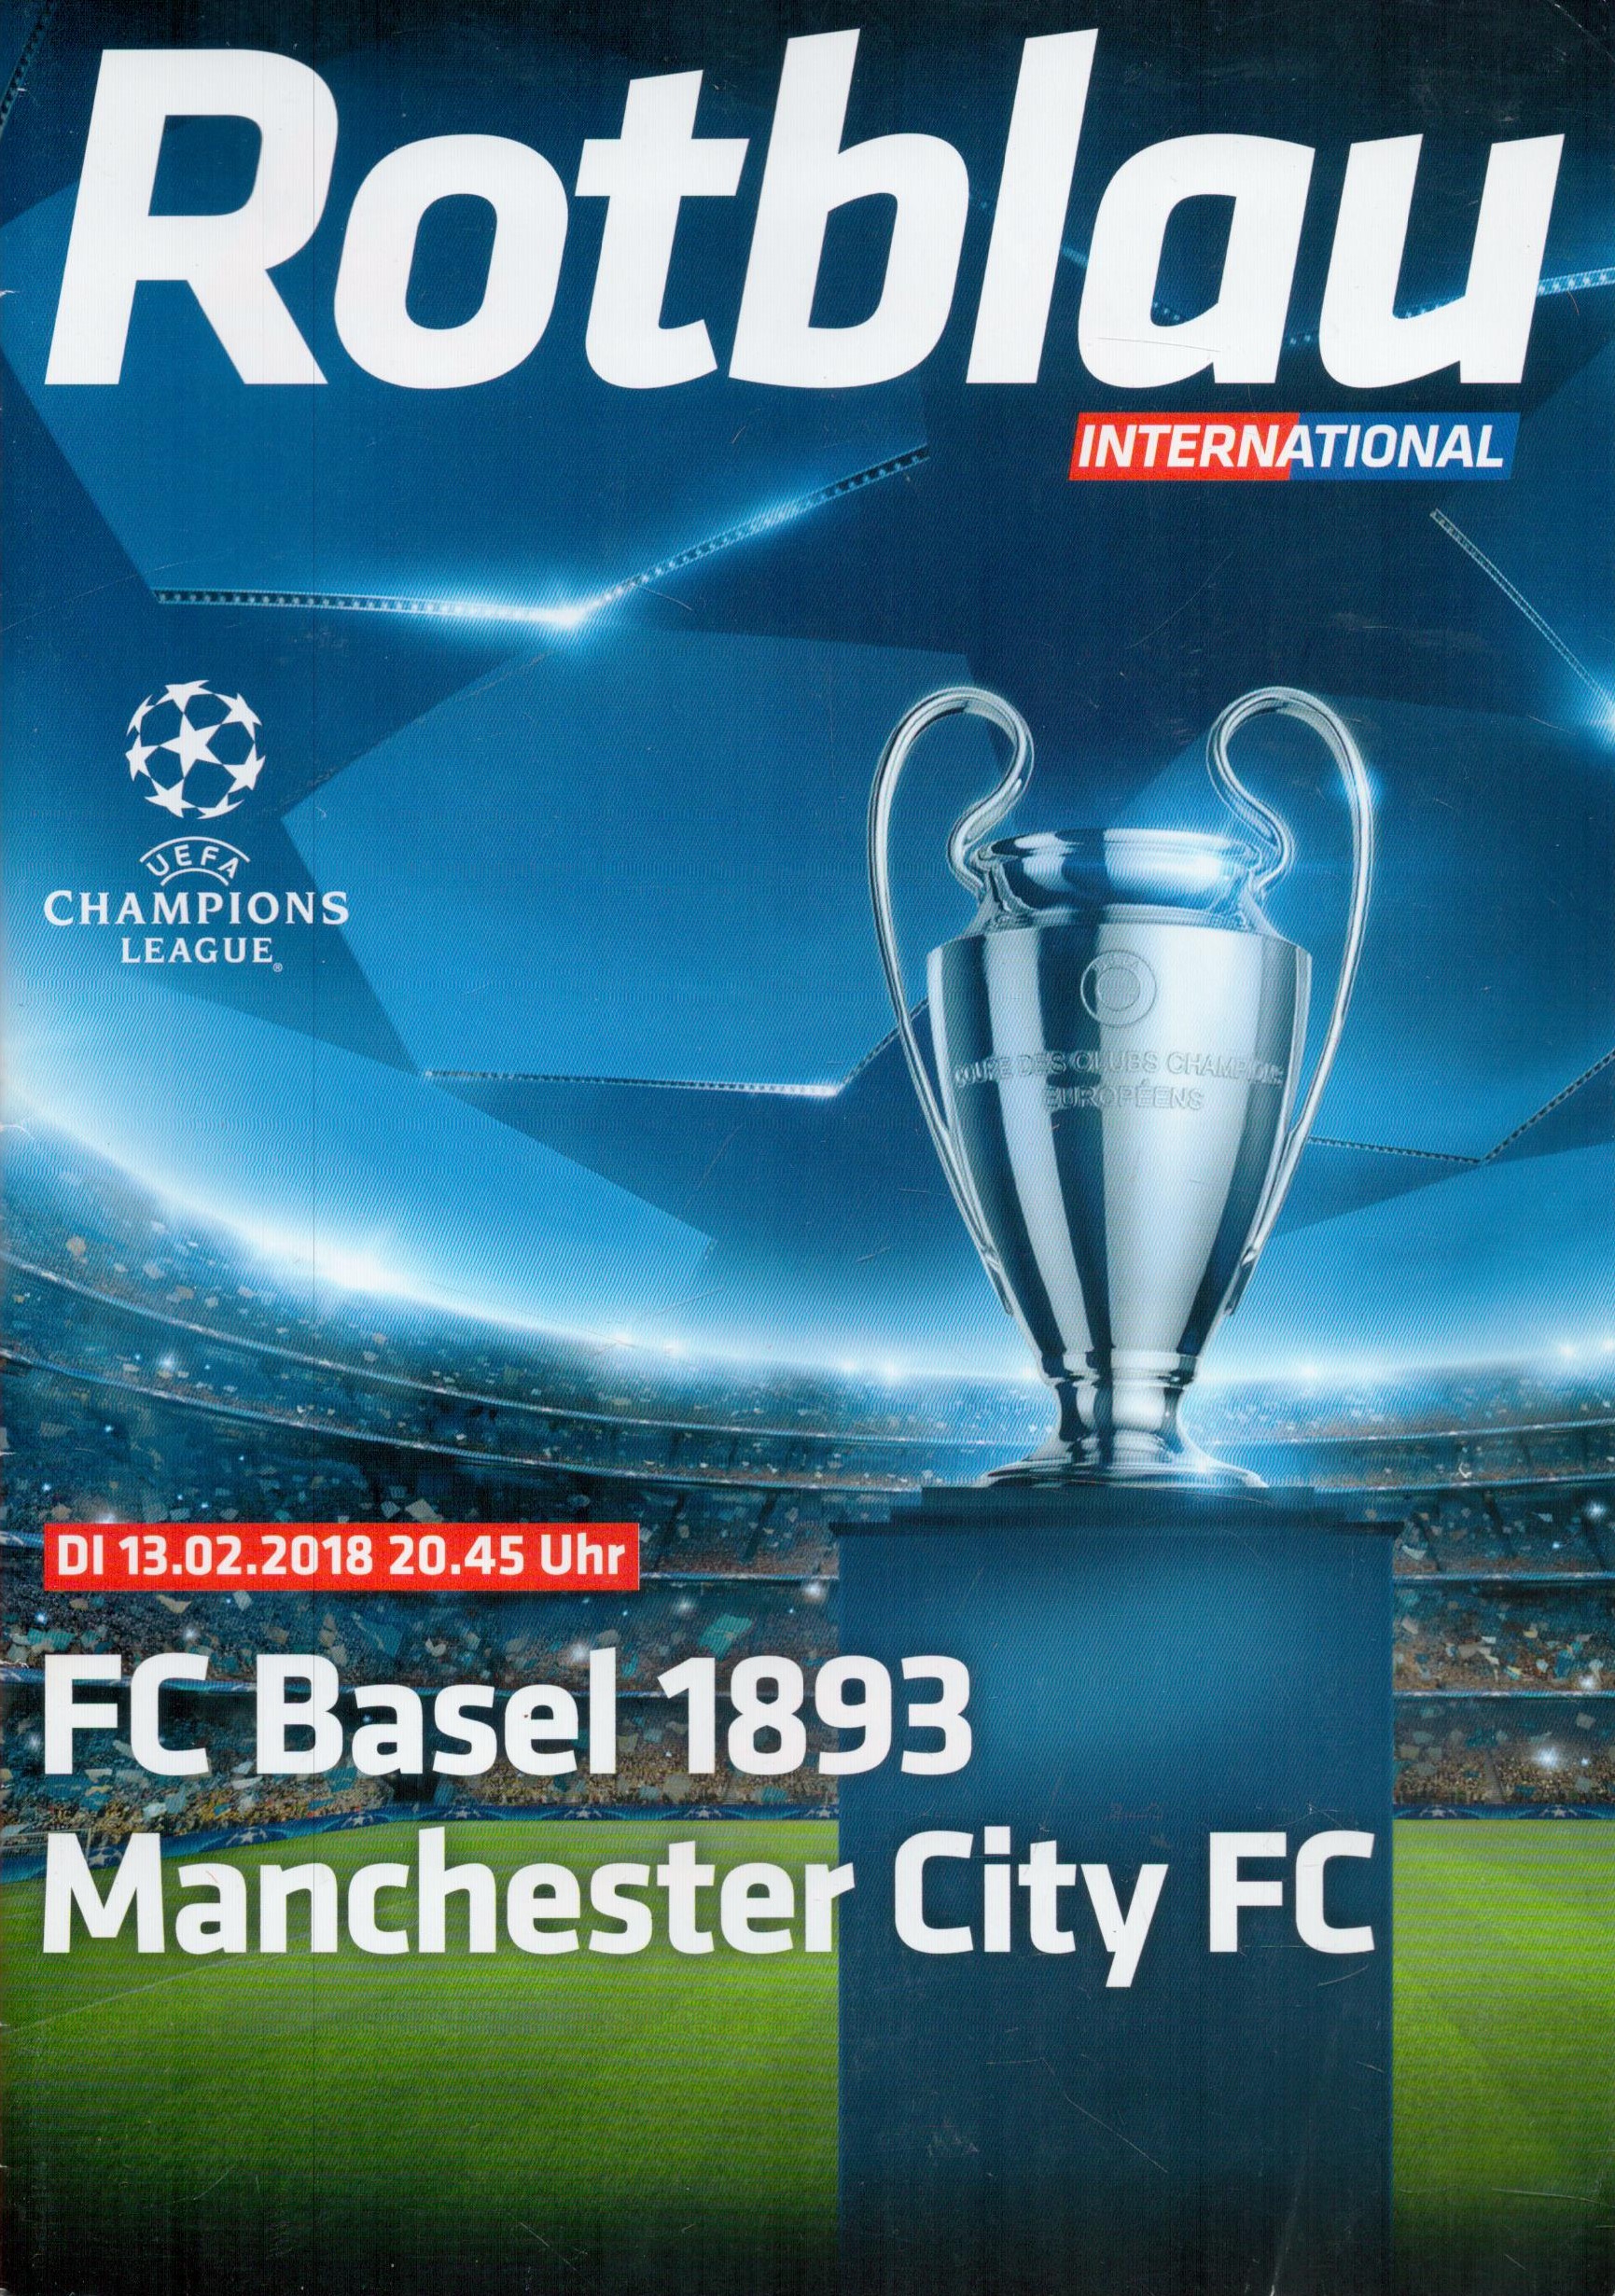 FC Basel 1893 V Manchester City Matchday Programme From 13th February 2018. A Champions League Game.